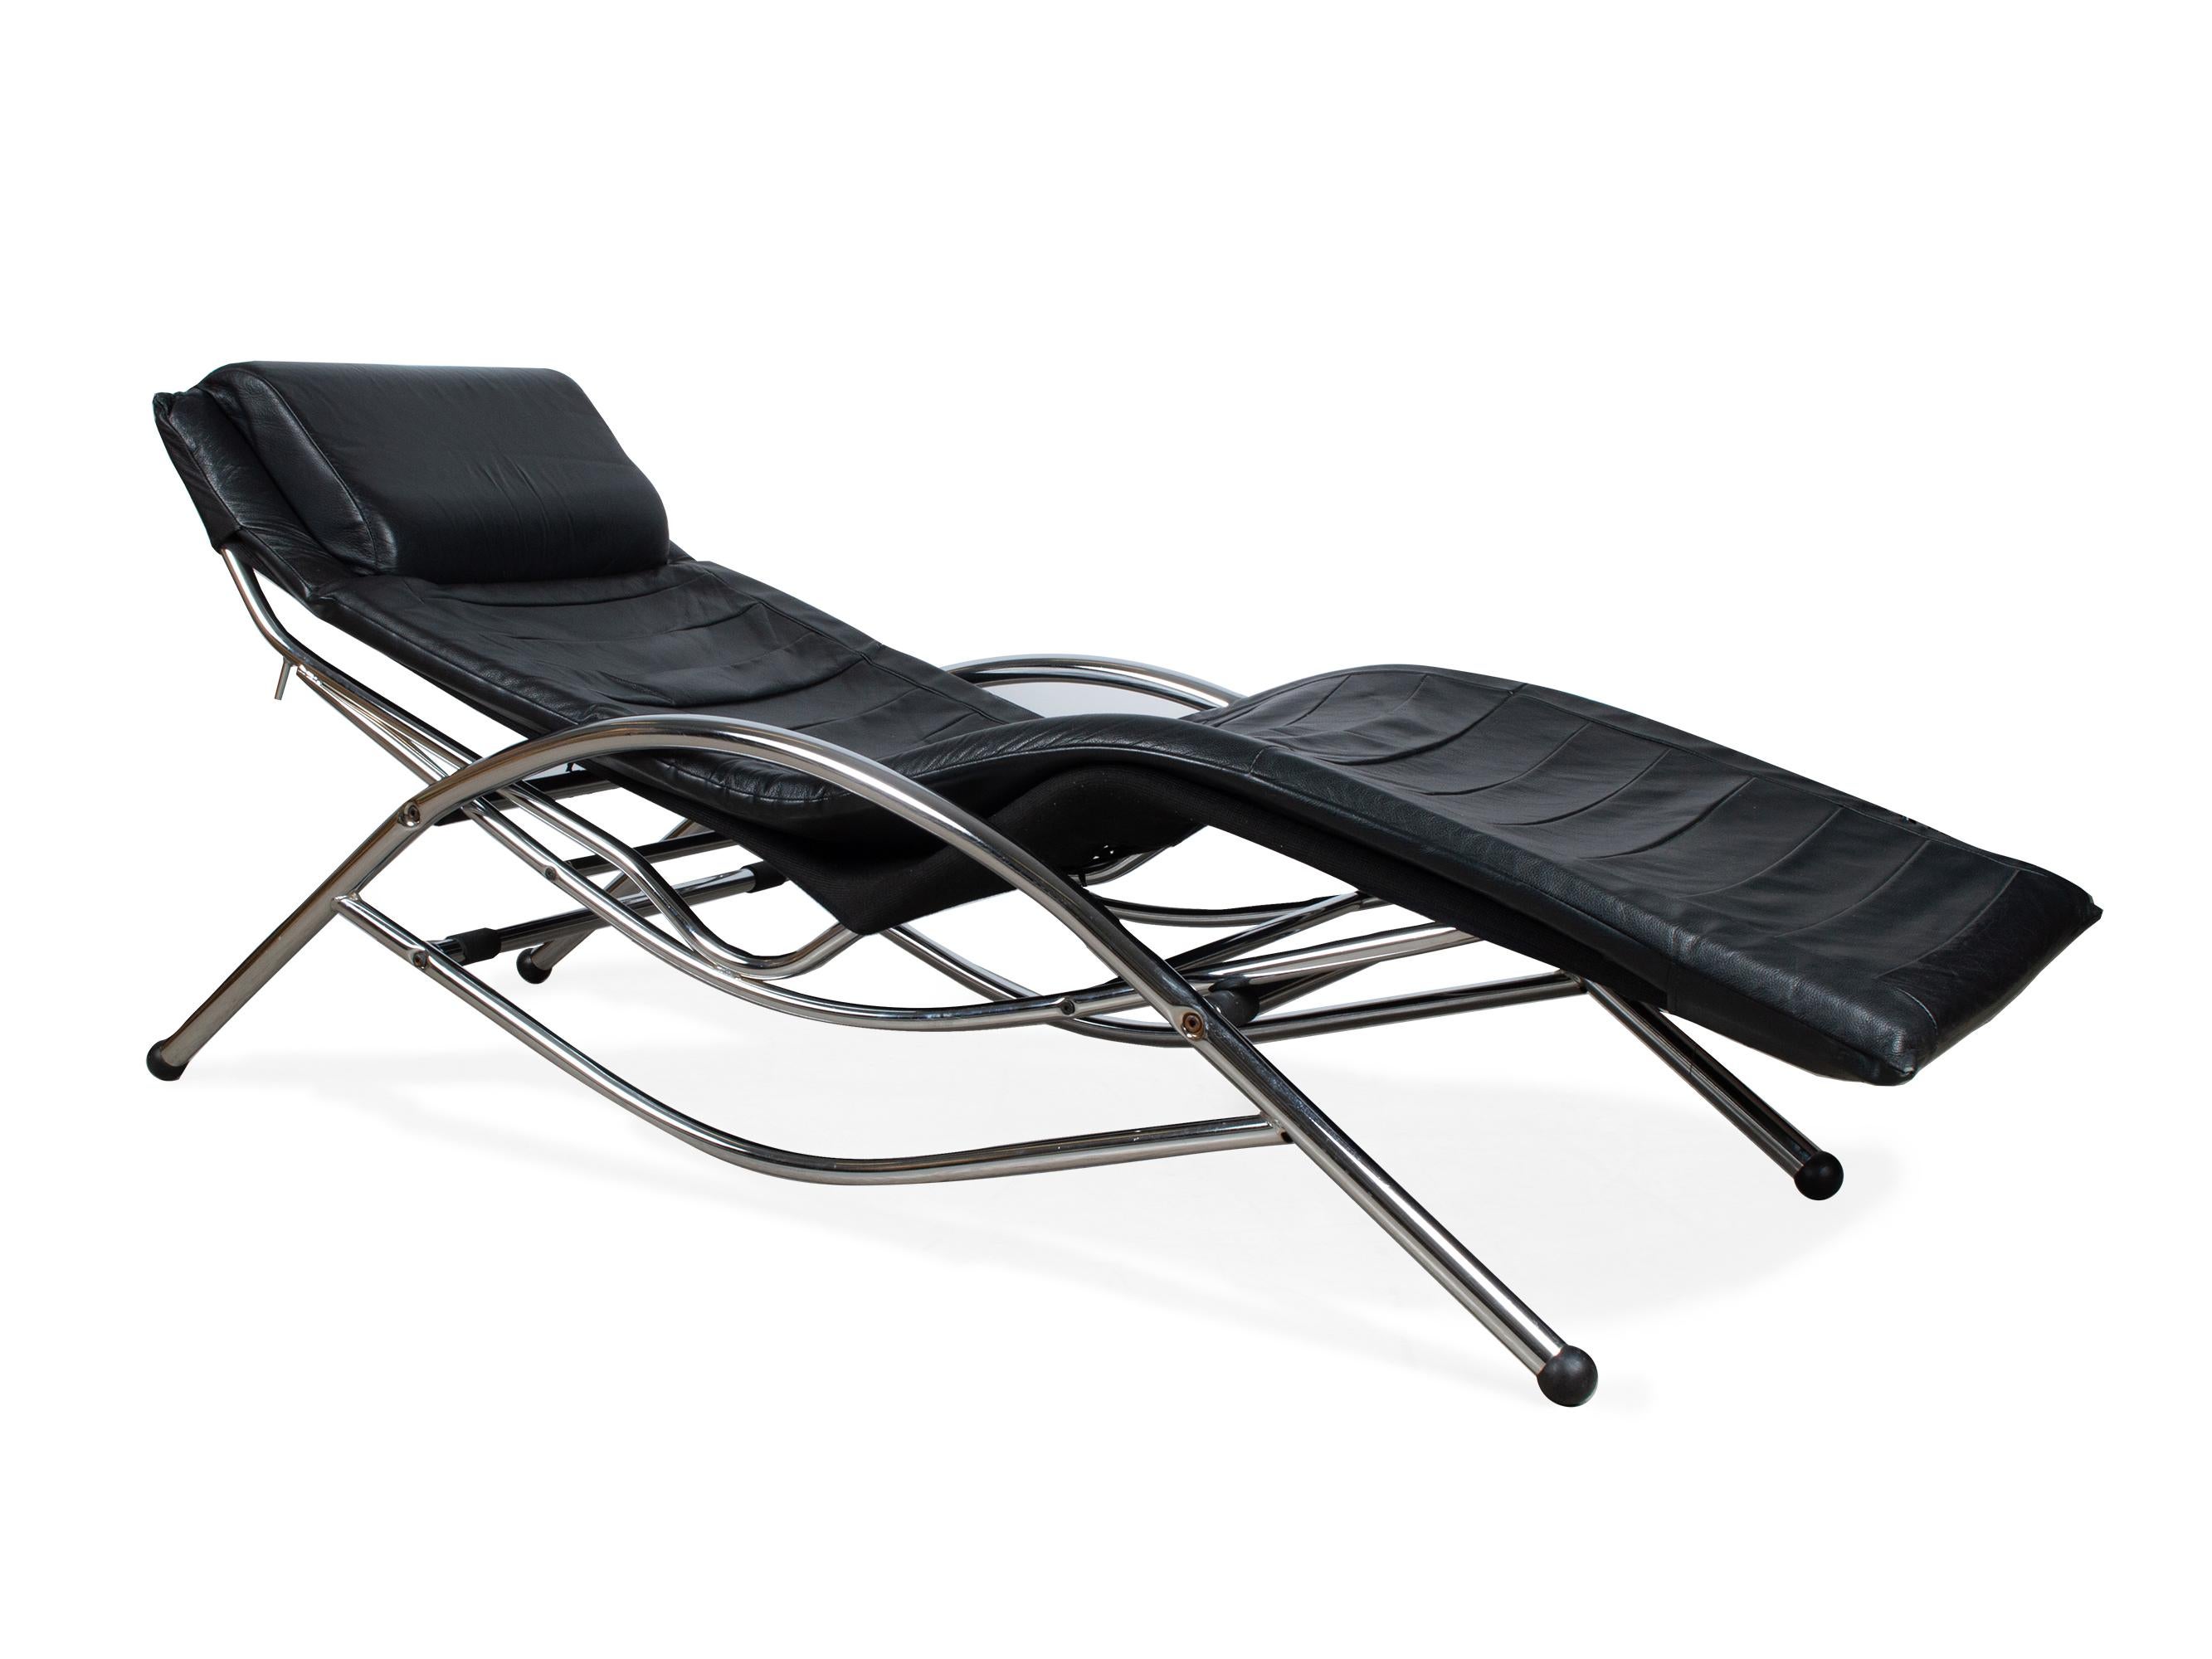 Mid-Century Modern Leather and Chrome Chaise Longue Daybed, Belgium, circa 1980 In Good Condition For Sale In London, GB